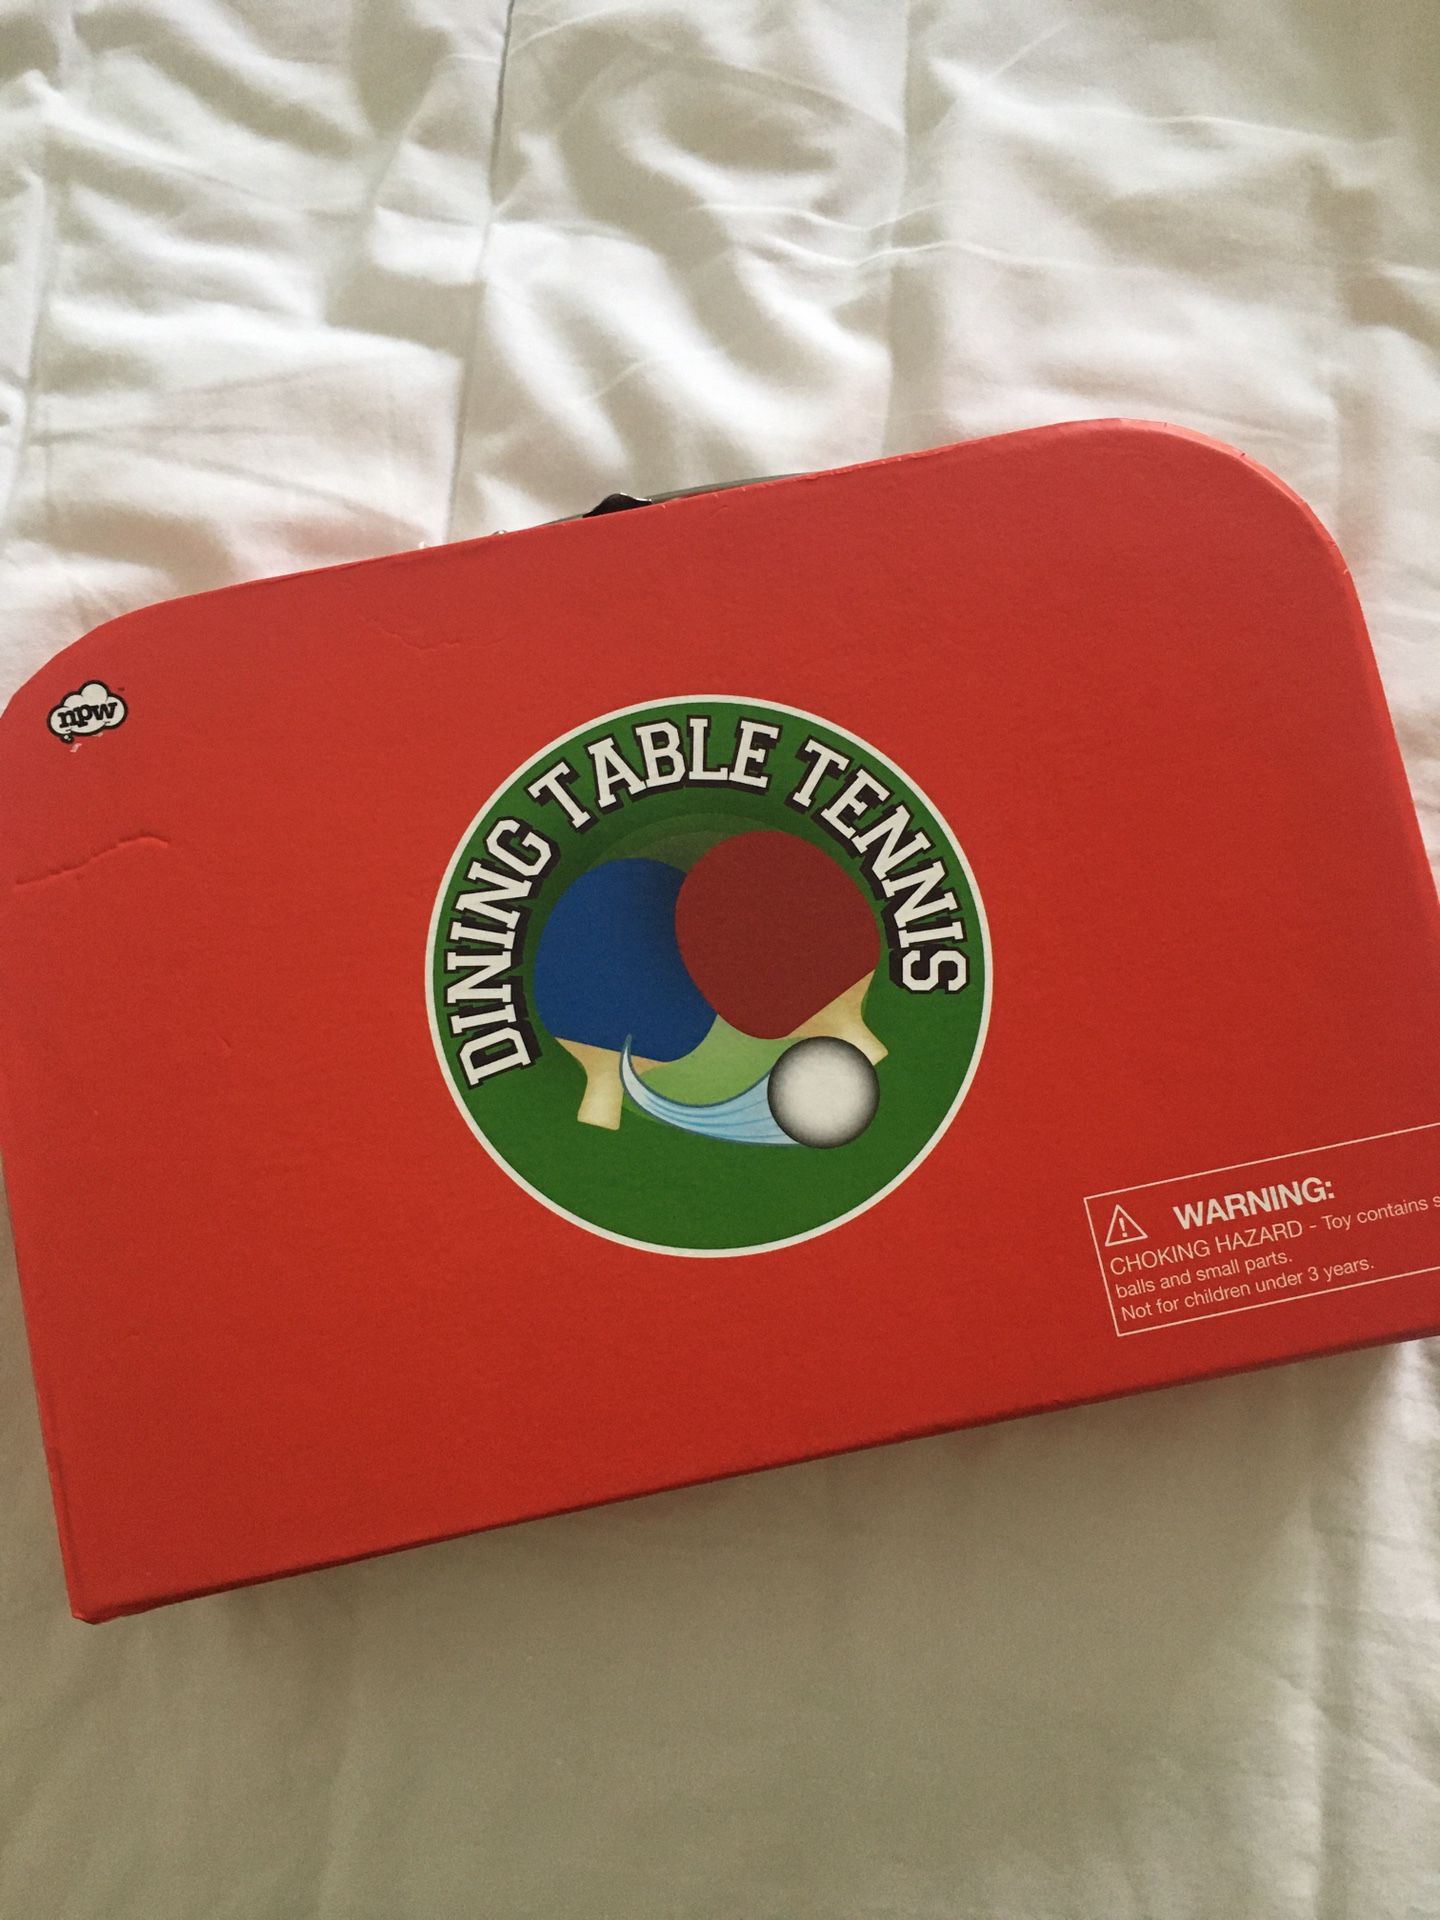 Dining table Tennis Set (NEW)